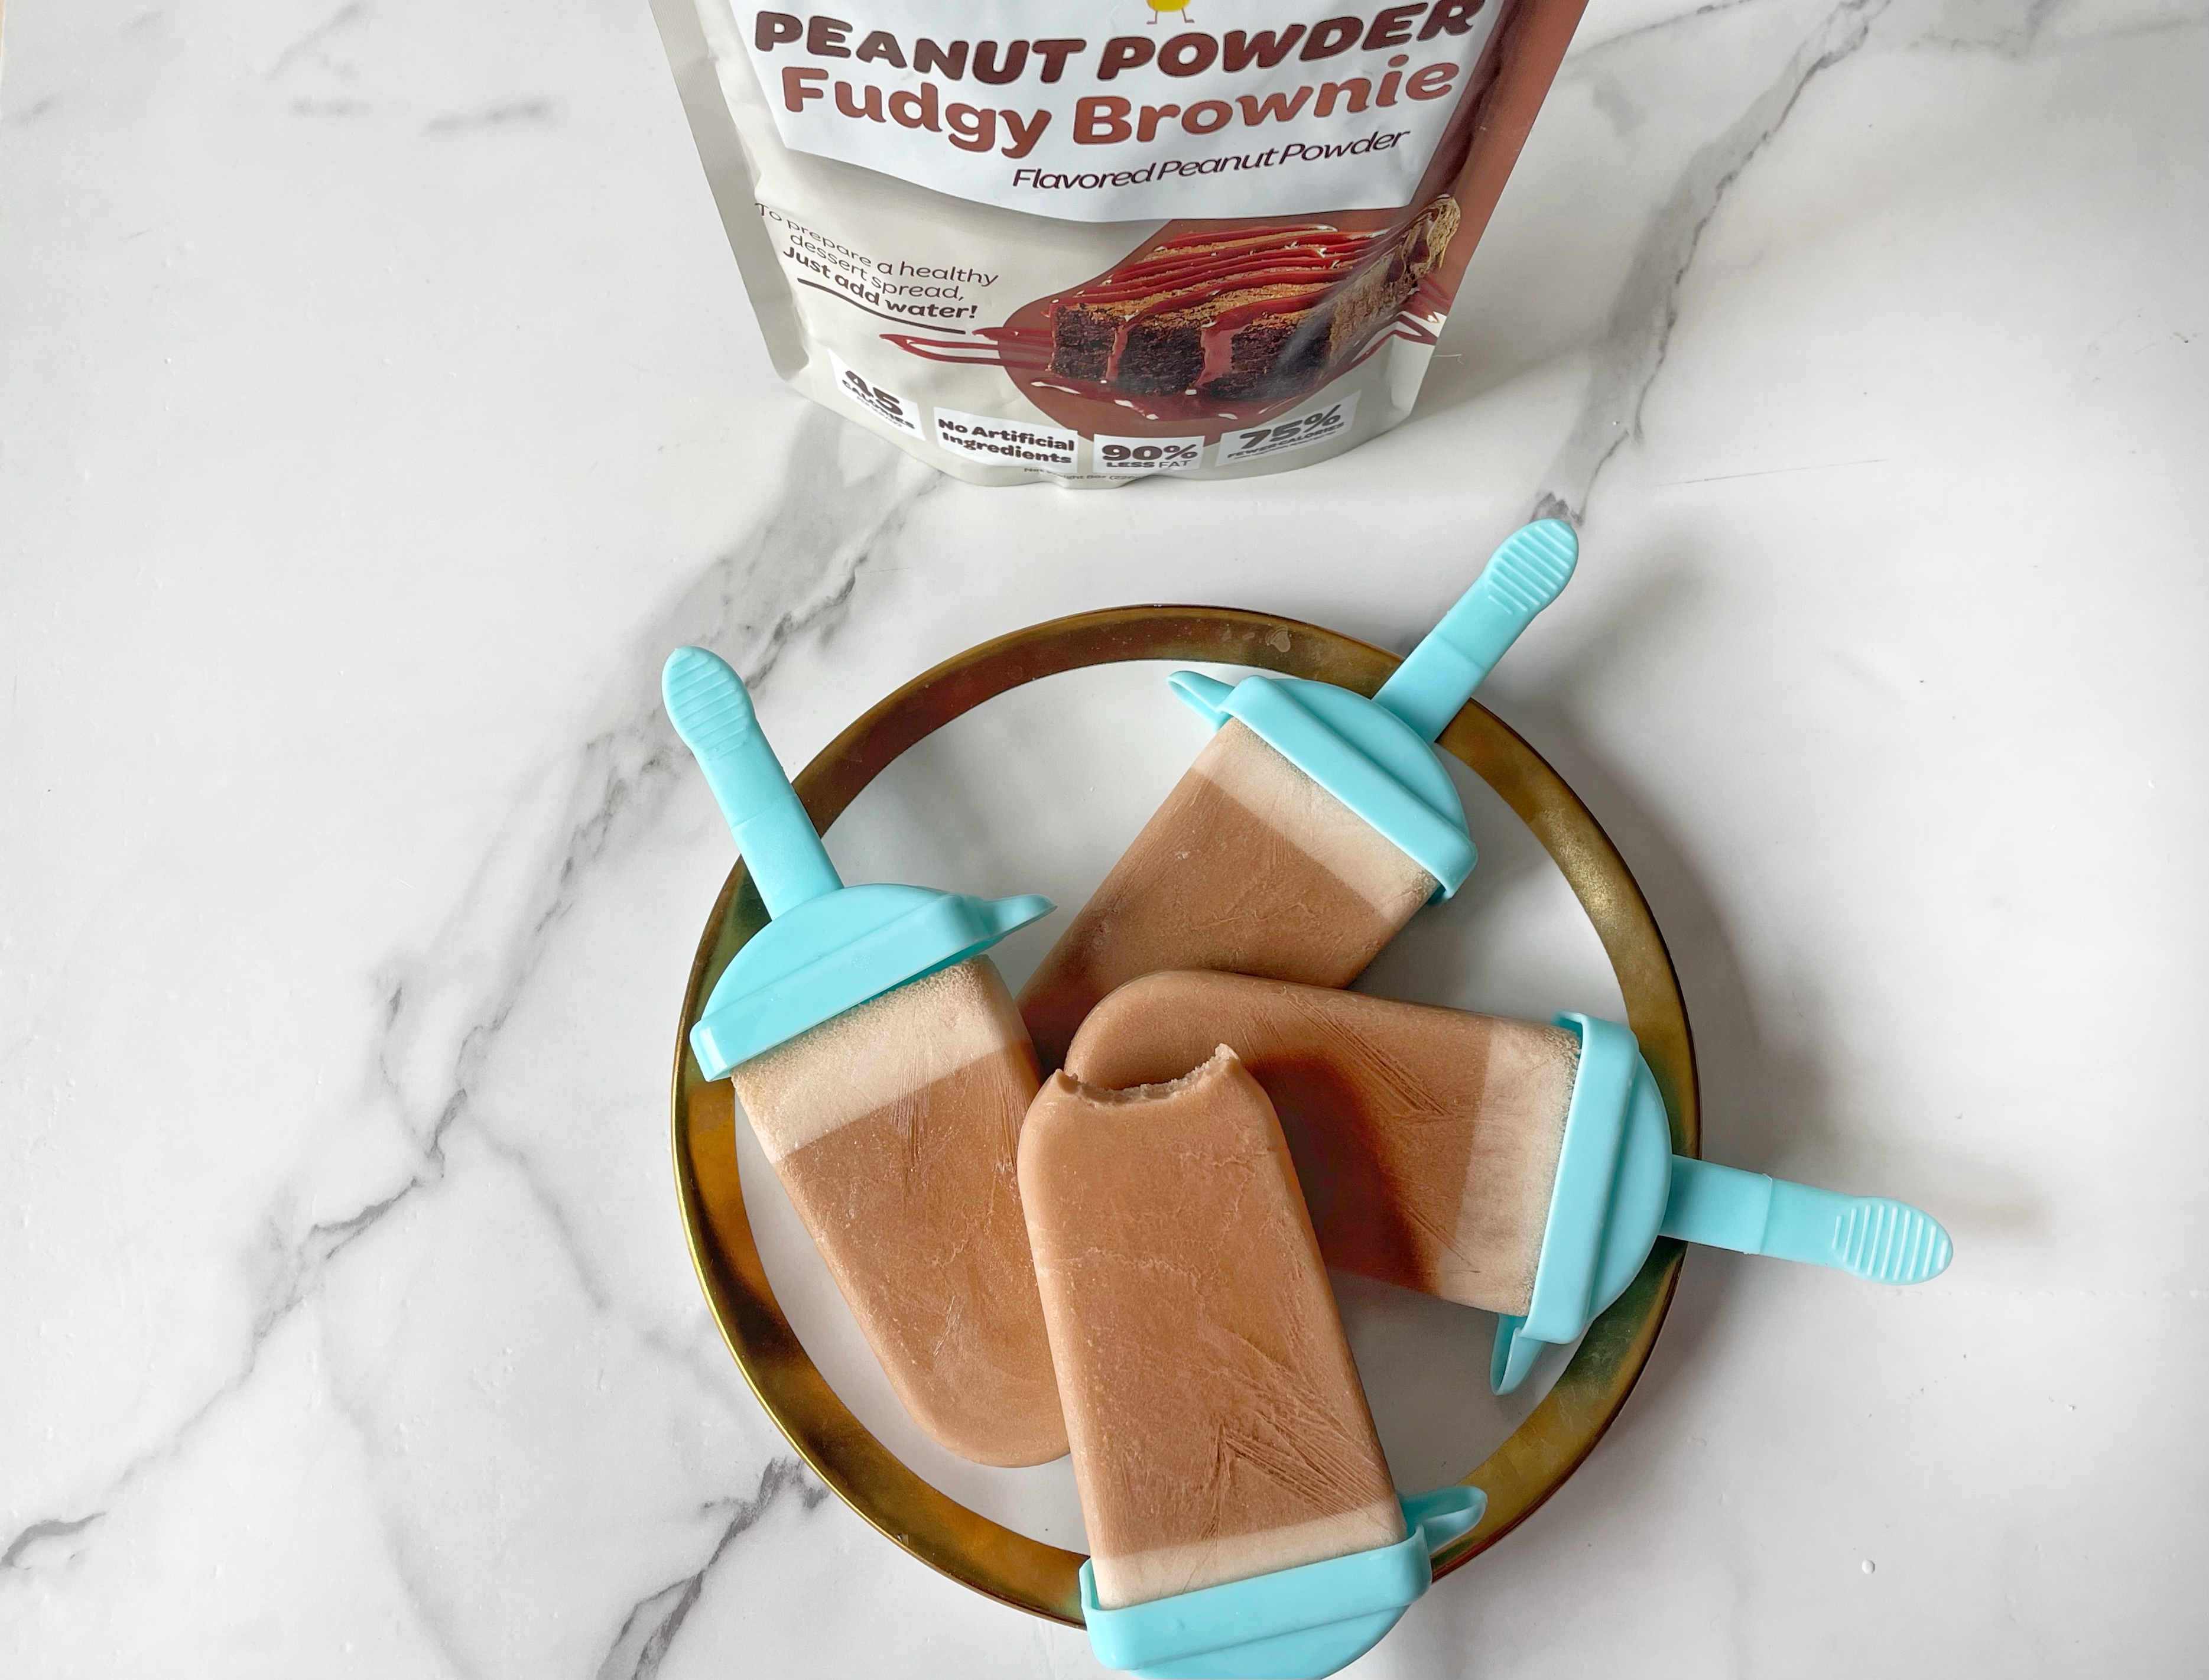 Image of The easiest healthy summer dessert snack - Fudgy Brownie Peanut Butter Frozen Fudgsicles 